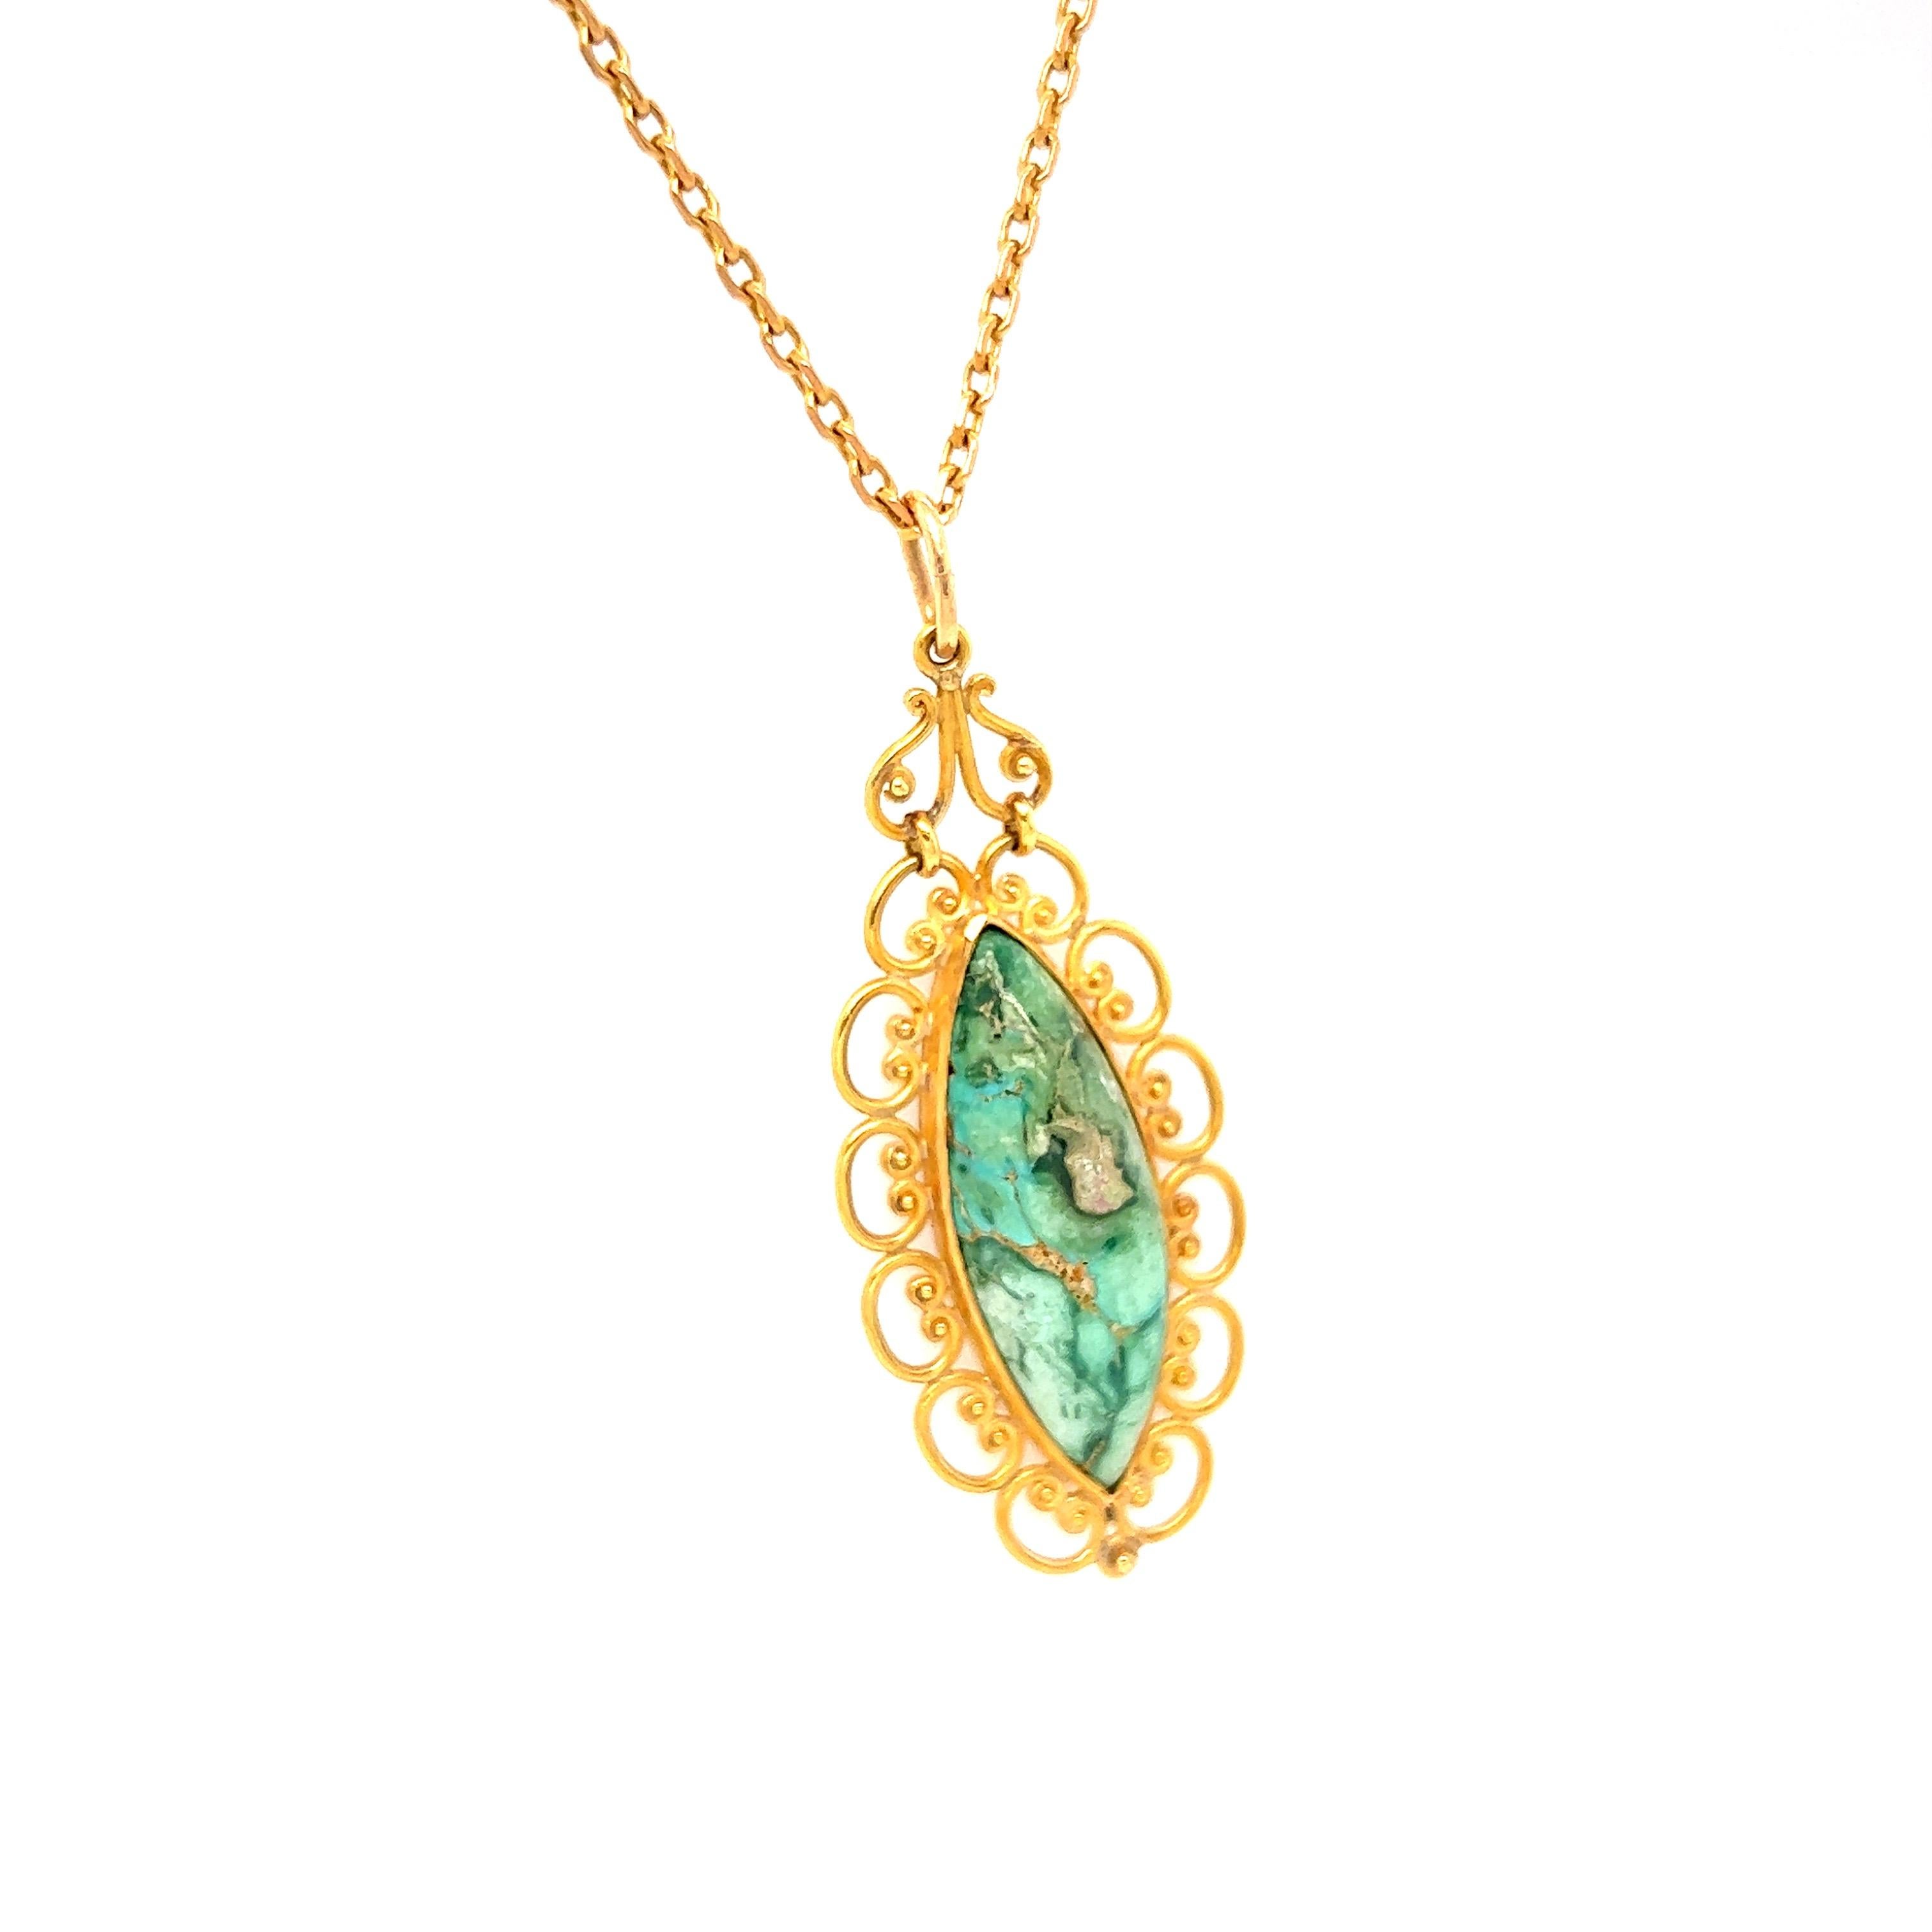 LOVE LOVE LOVE. I just love this Gorgeous Vintage Filigree Turquoise Pendant and Long Chain. Crafted in 18K Yellow Gold, the design is a simple, bezel set, large, piece of Natural Turquoise, surrounded by an intricate hand wrought gold frame! The